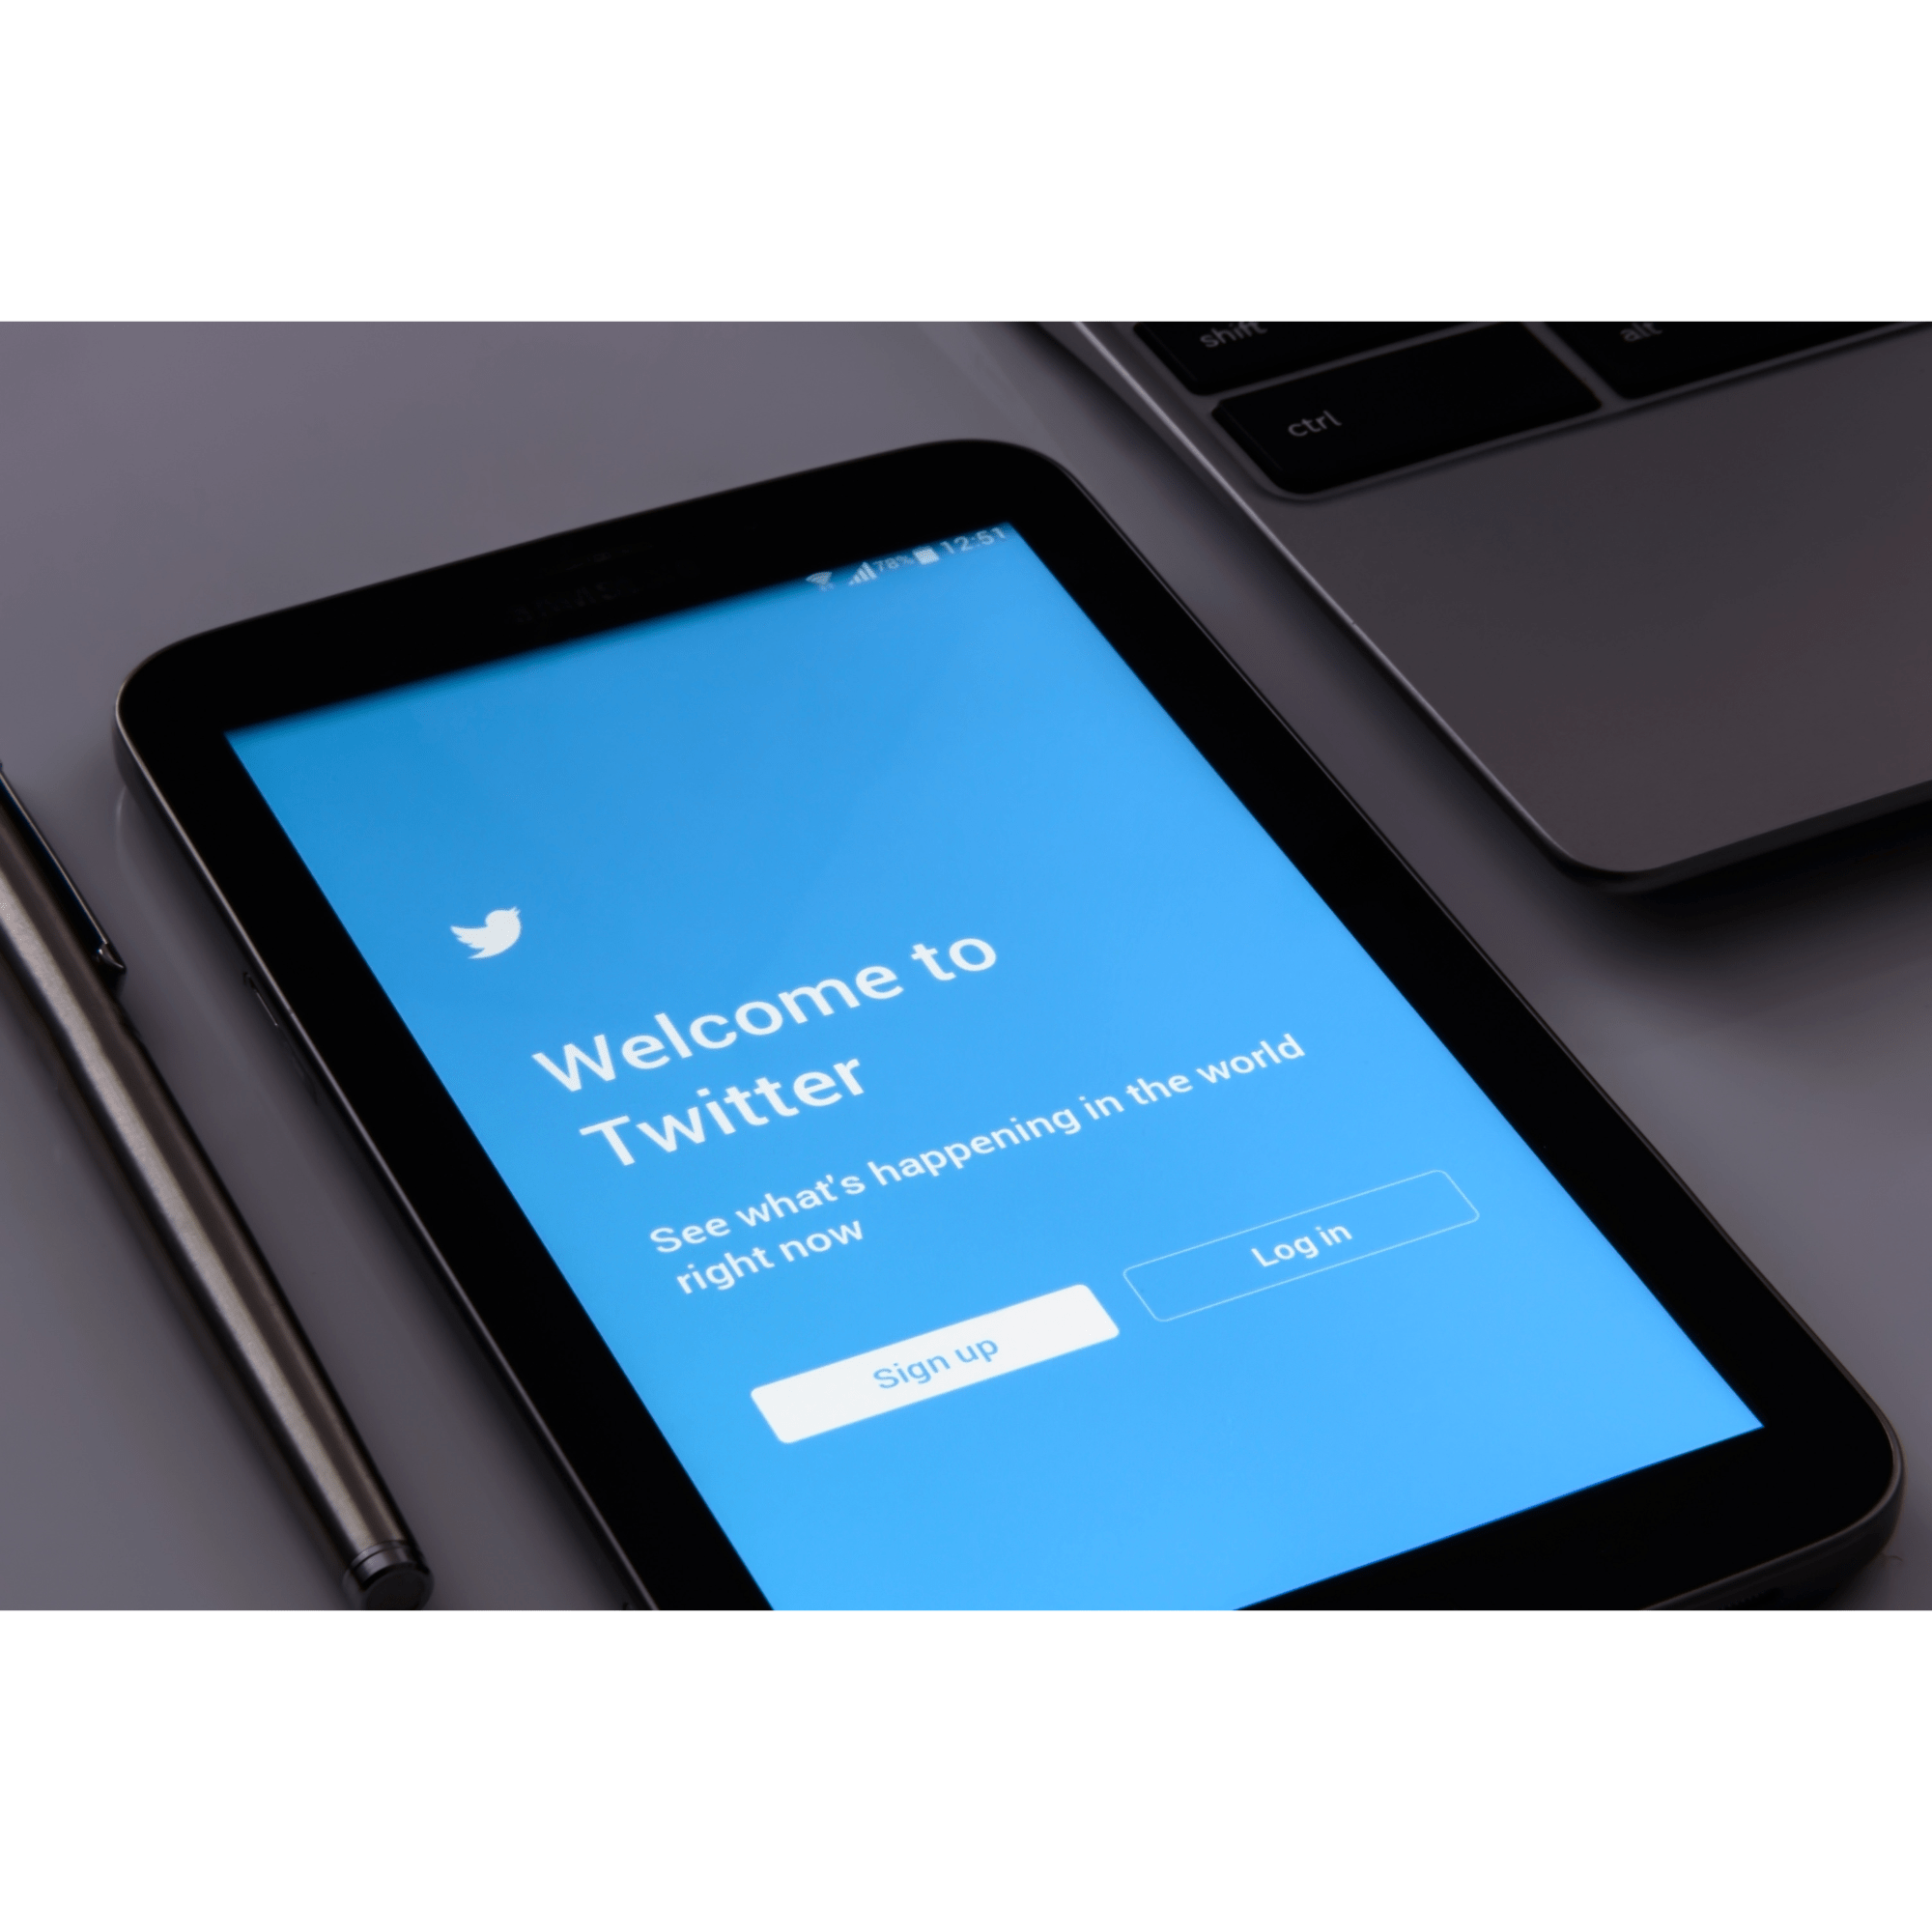 WAYS TO GET BETTER ENGAGEMENT ON TWITTER